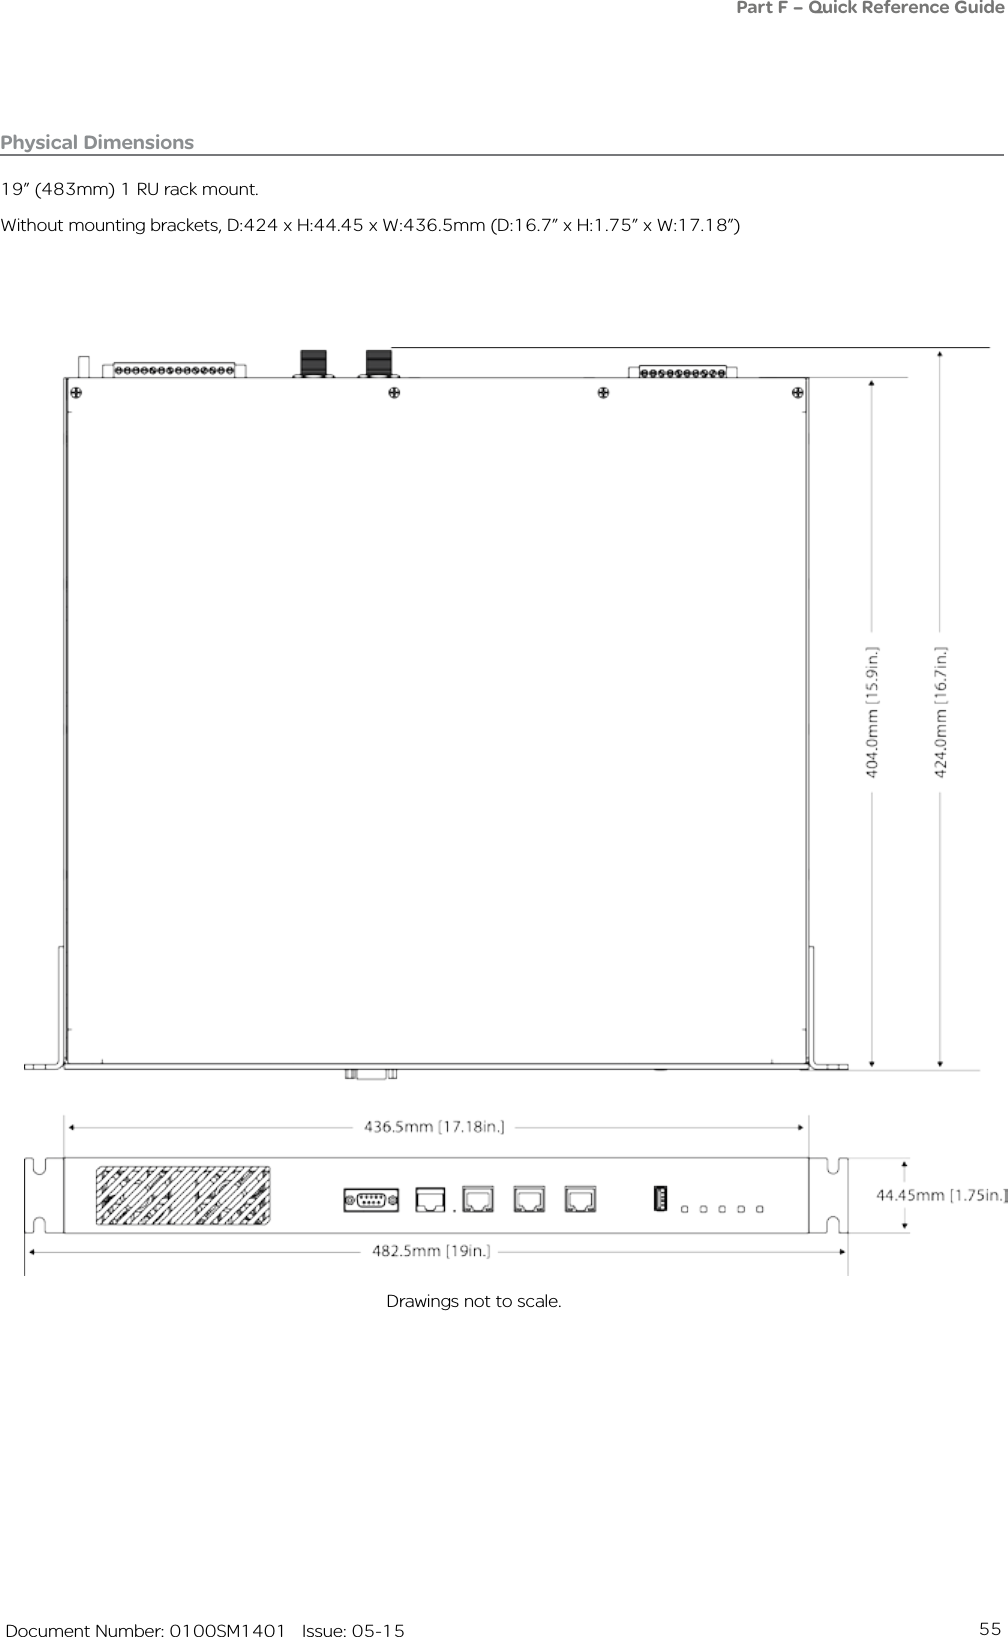 55   Document Number: 0100SM1401   Issue: 05-15Physical Dimensions19” (483mm) 1 RU rack mount.Without mounting brackets, D:424 x H:44.45 x W:436.5mm (D:16.7” x H:1.75” x W:17.18”)Drawings not to scale.Part F – Quick Reference Guide